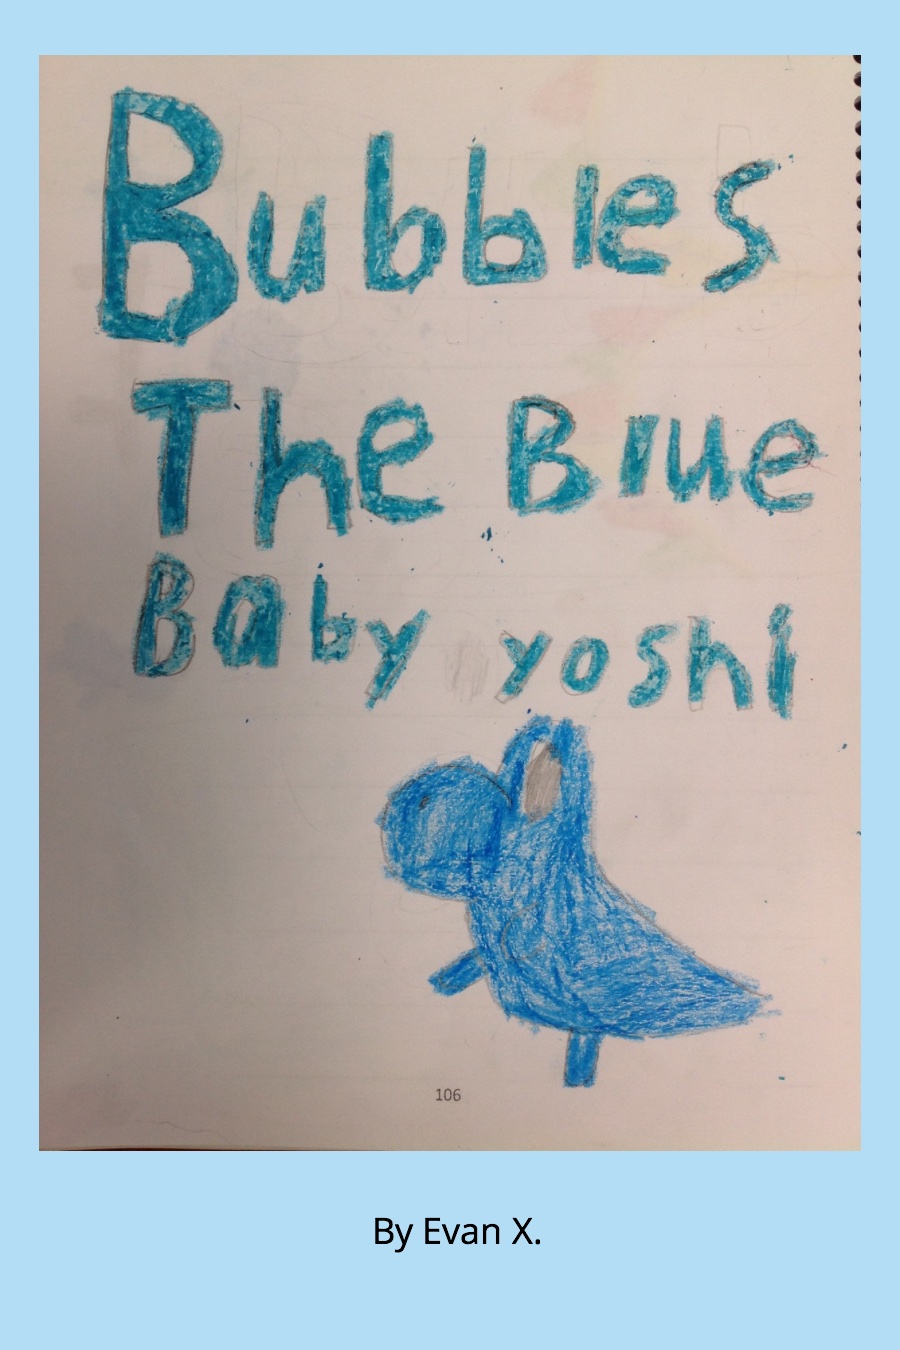 Bubbles The Blue Baby Yoshi by Evan X